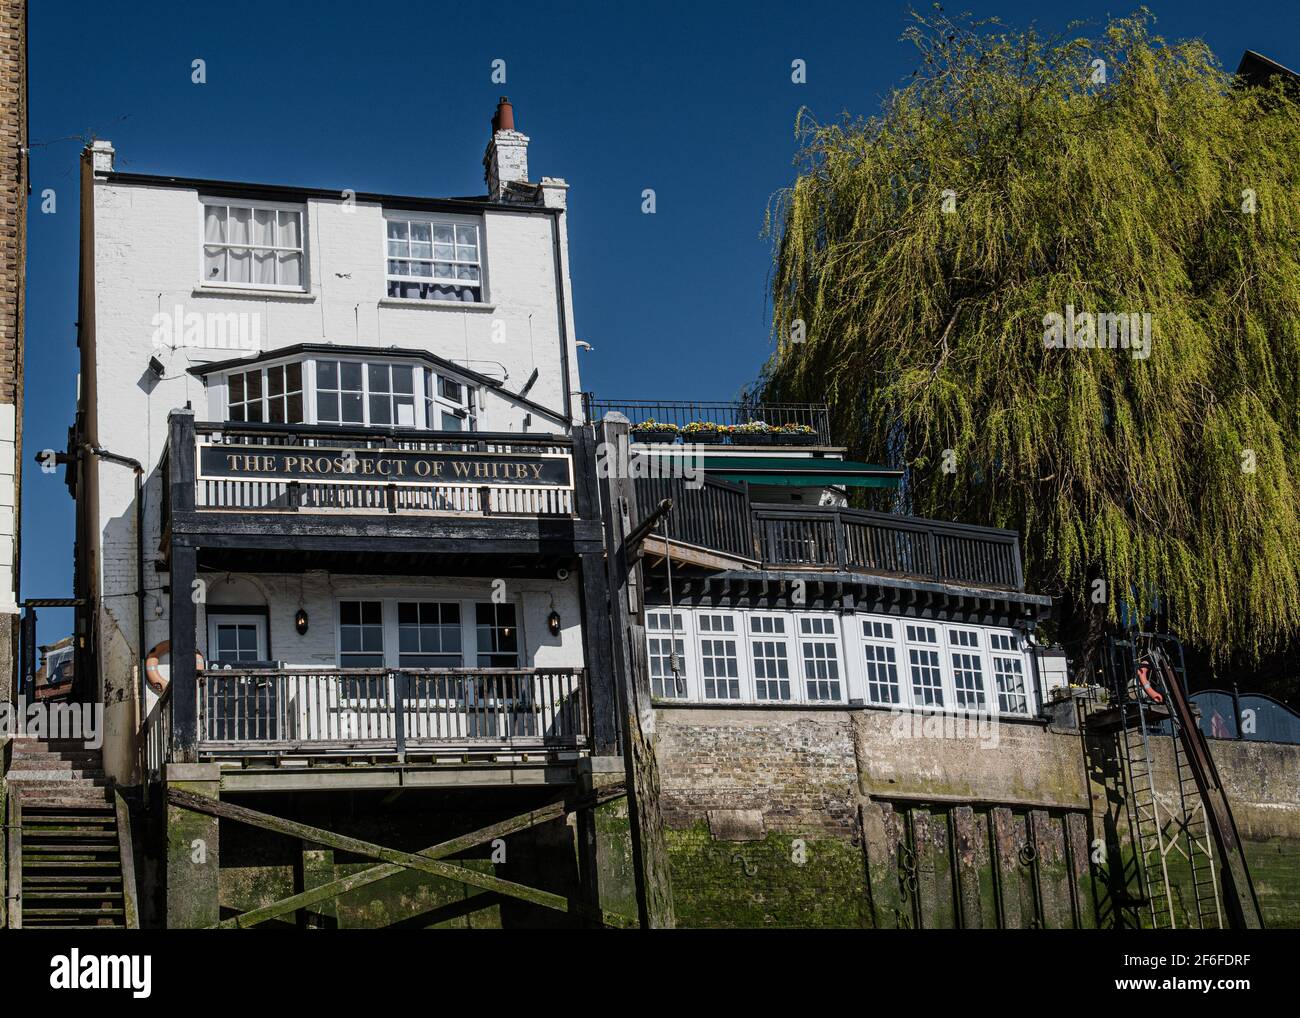 The Prospect of Whitby Pub, Wapping, London, Großbritannien Stockfoto